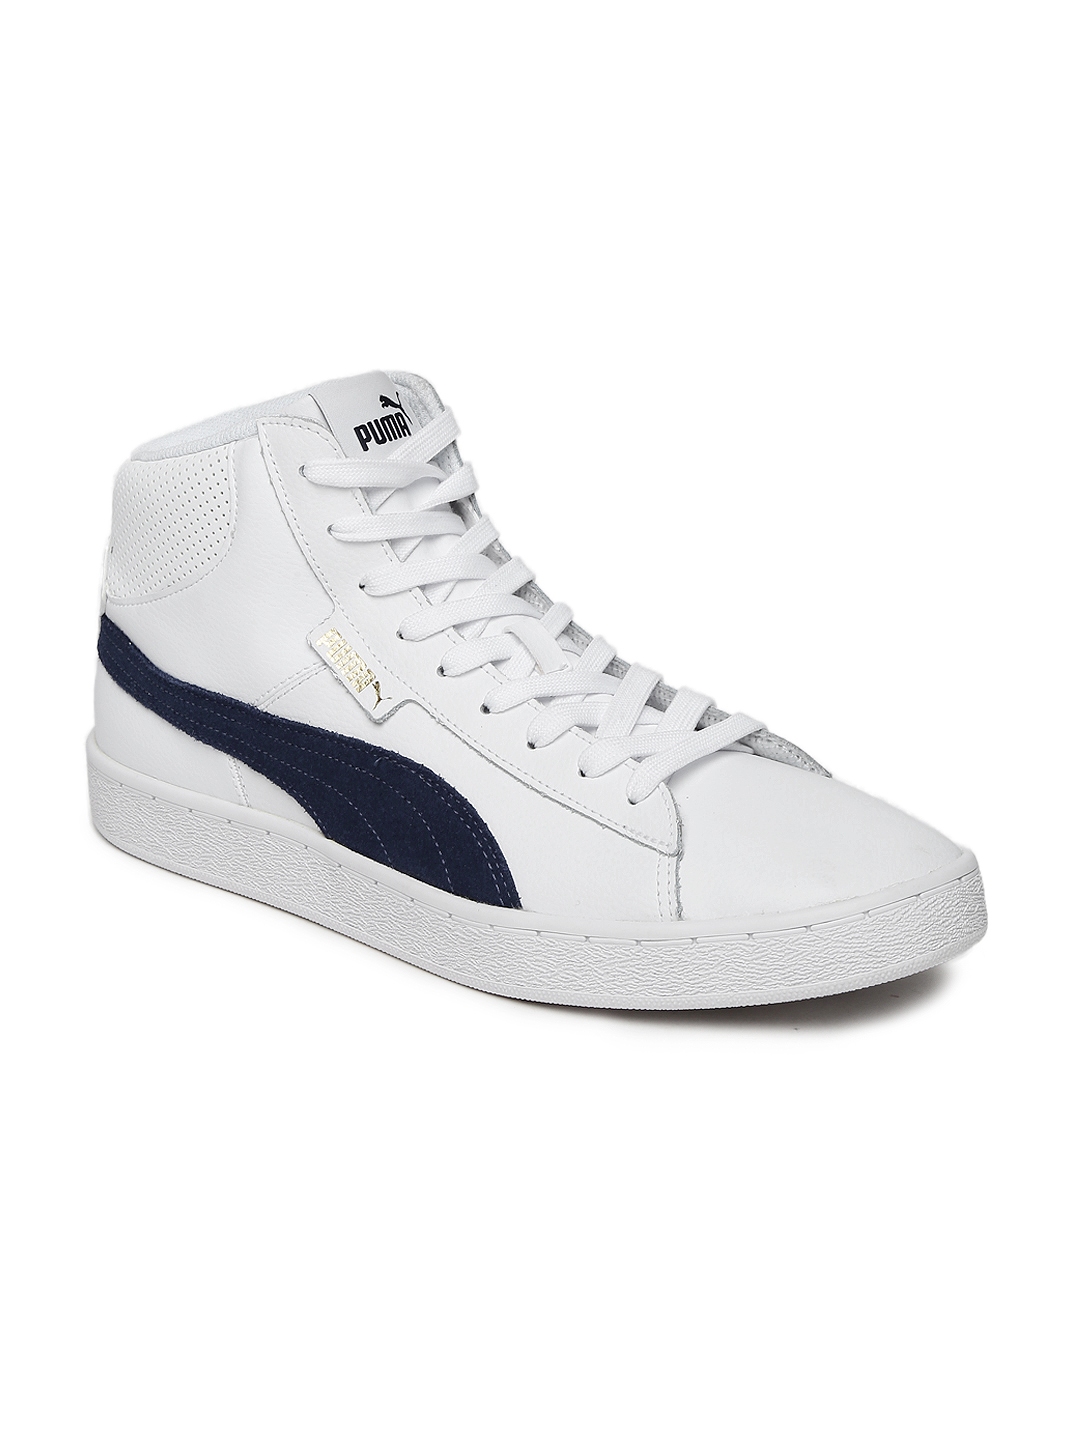 Buy Puma Men White 1948 Mid Top Leather Sneakers - Casual Shoes for Men ...